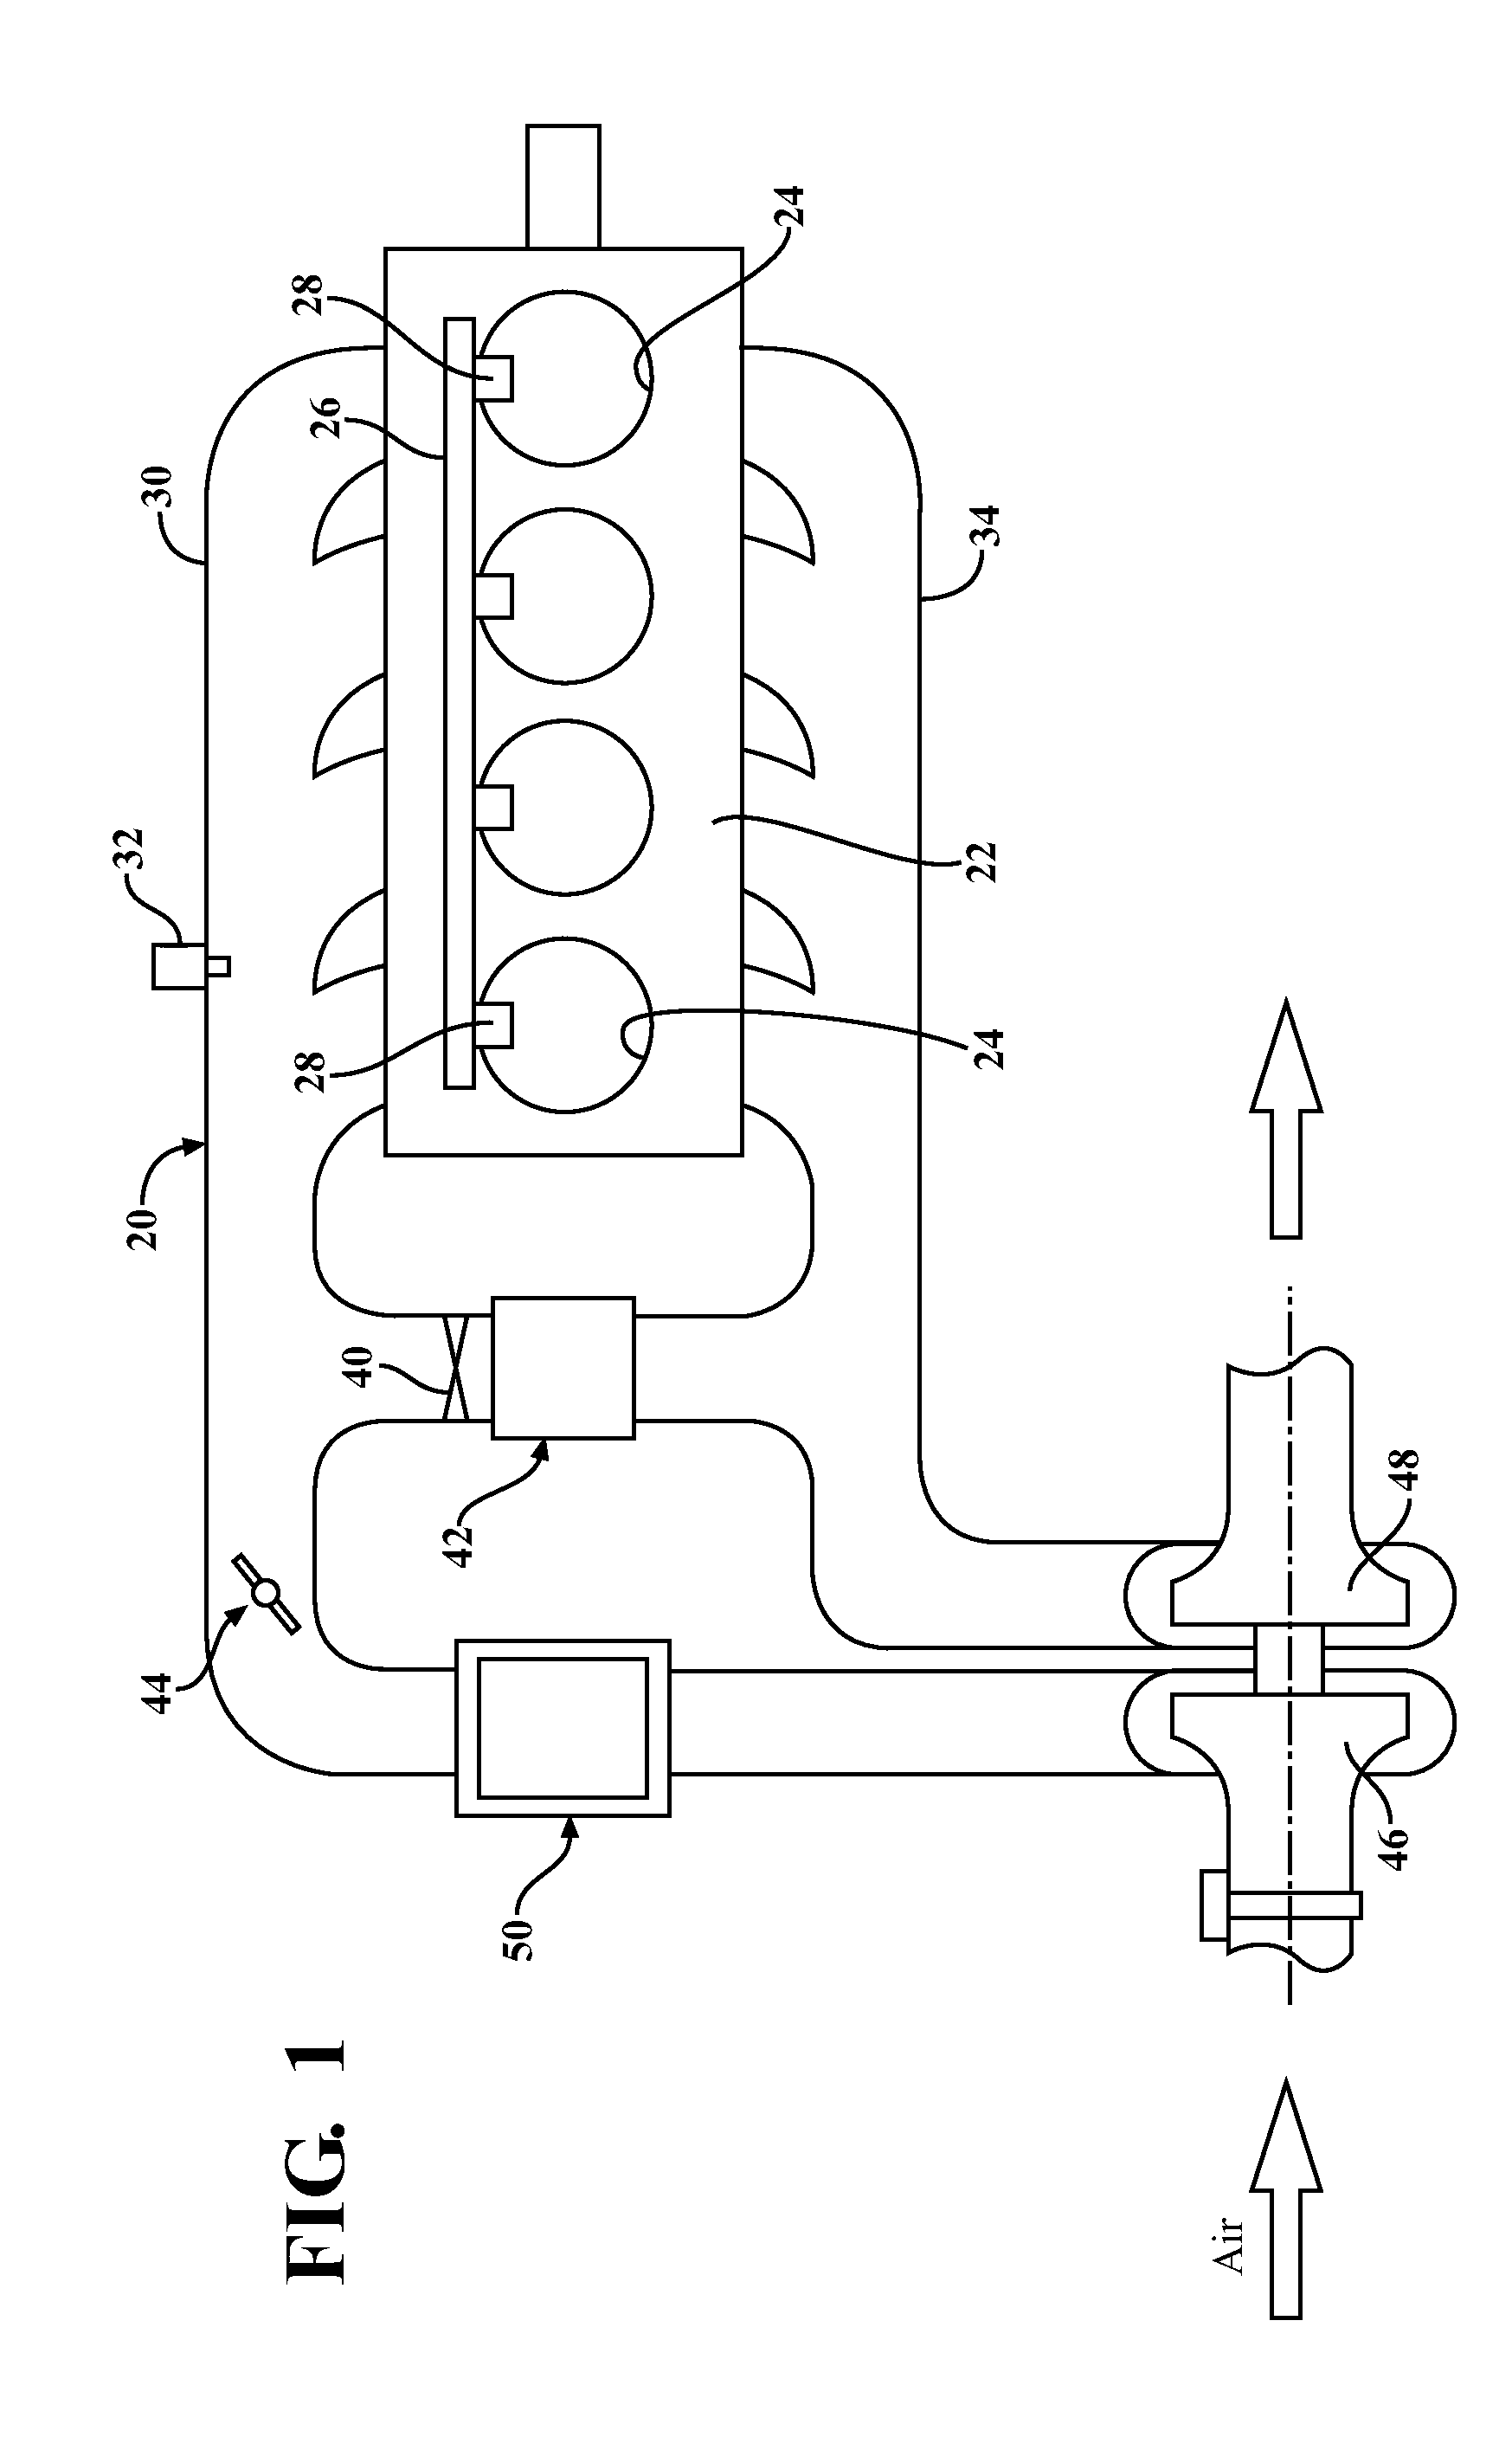 Rate-based model predictive control method for internal combustion engine air path control